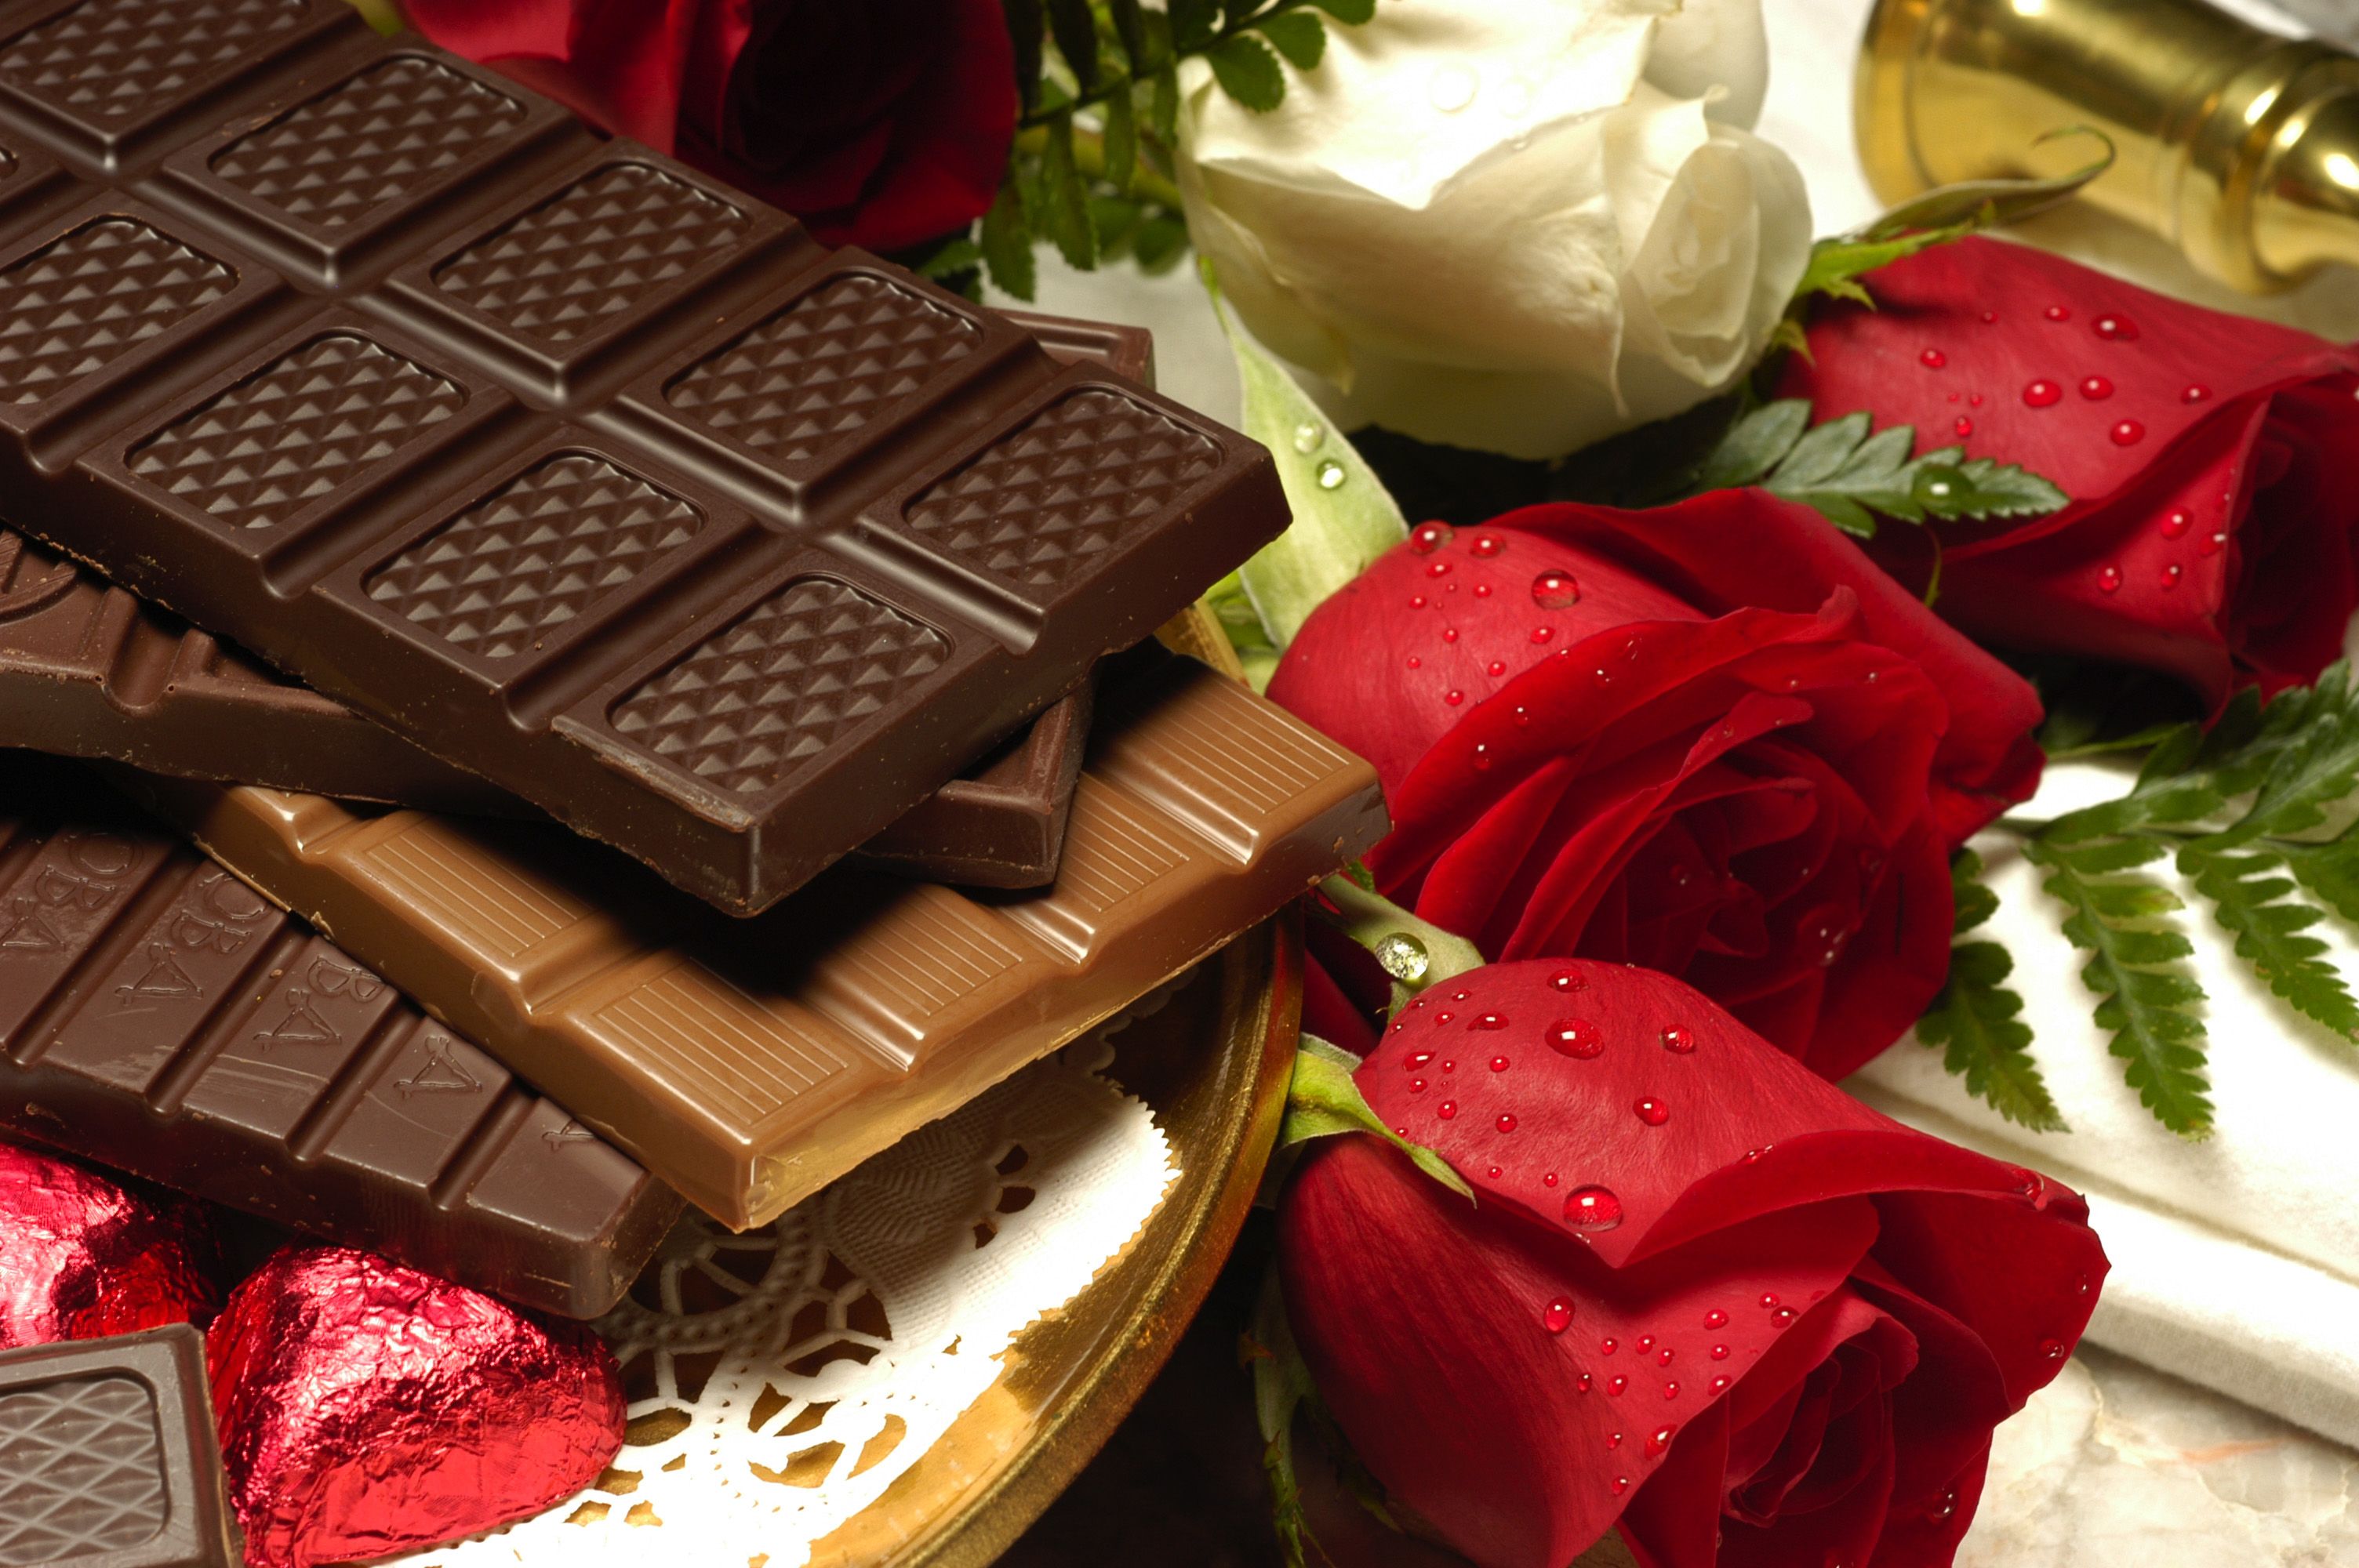 A plate with chocolate bars and roses - Foodie